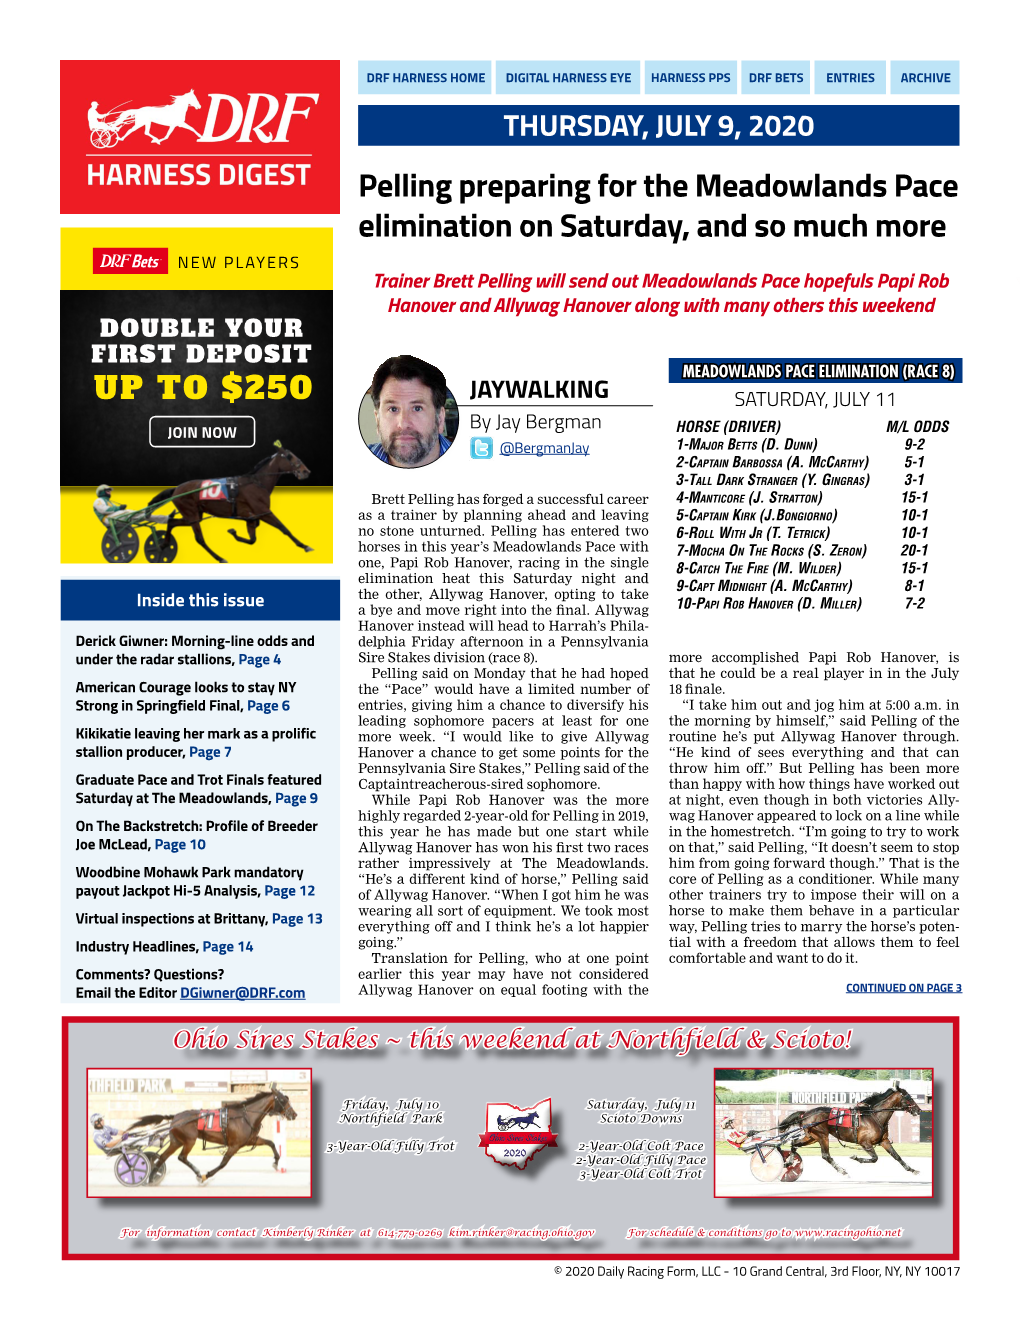 Pelling Preparing for the Meadowlands Pace Elimination On